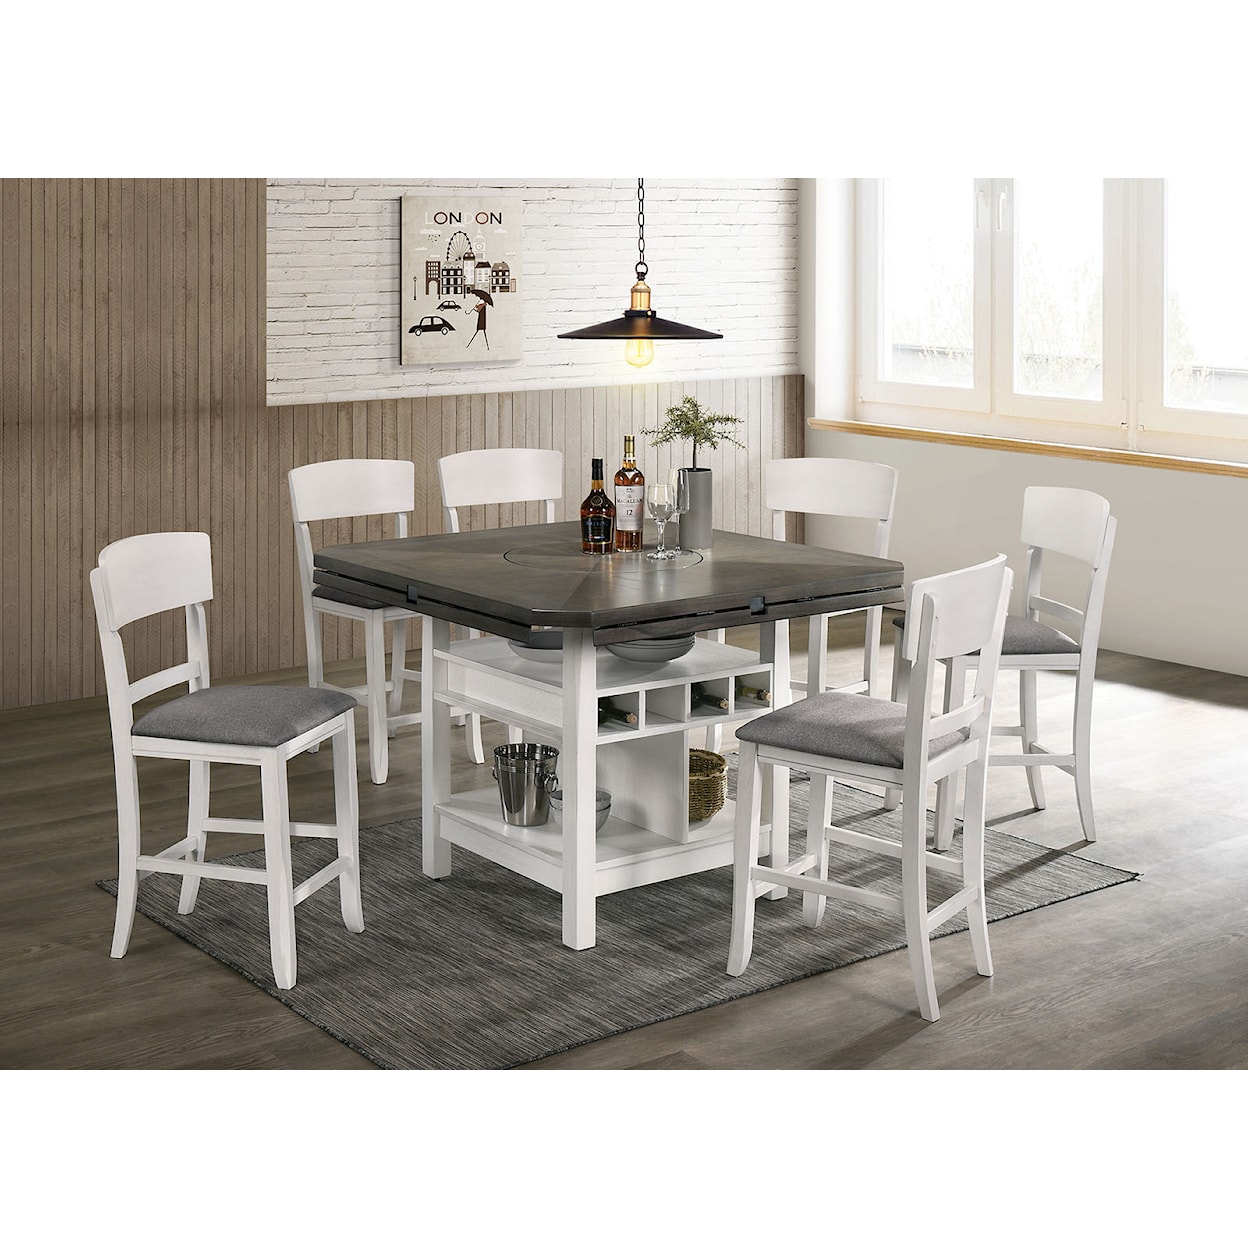 FUSA Stacie Counter Height Dining Set